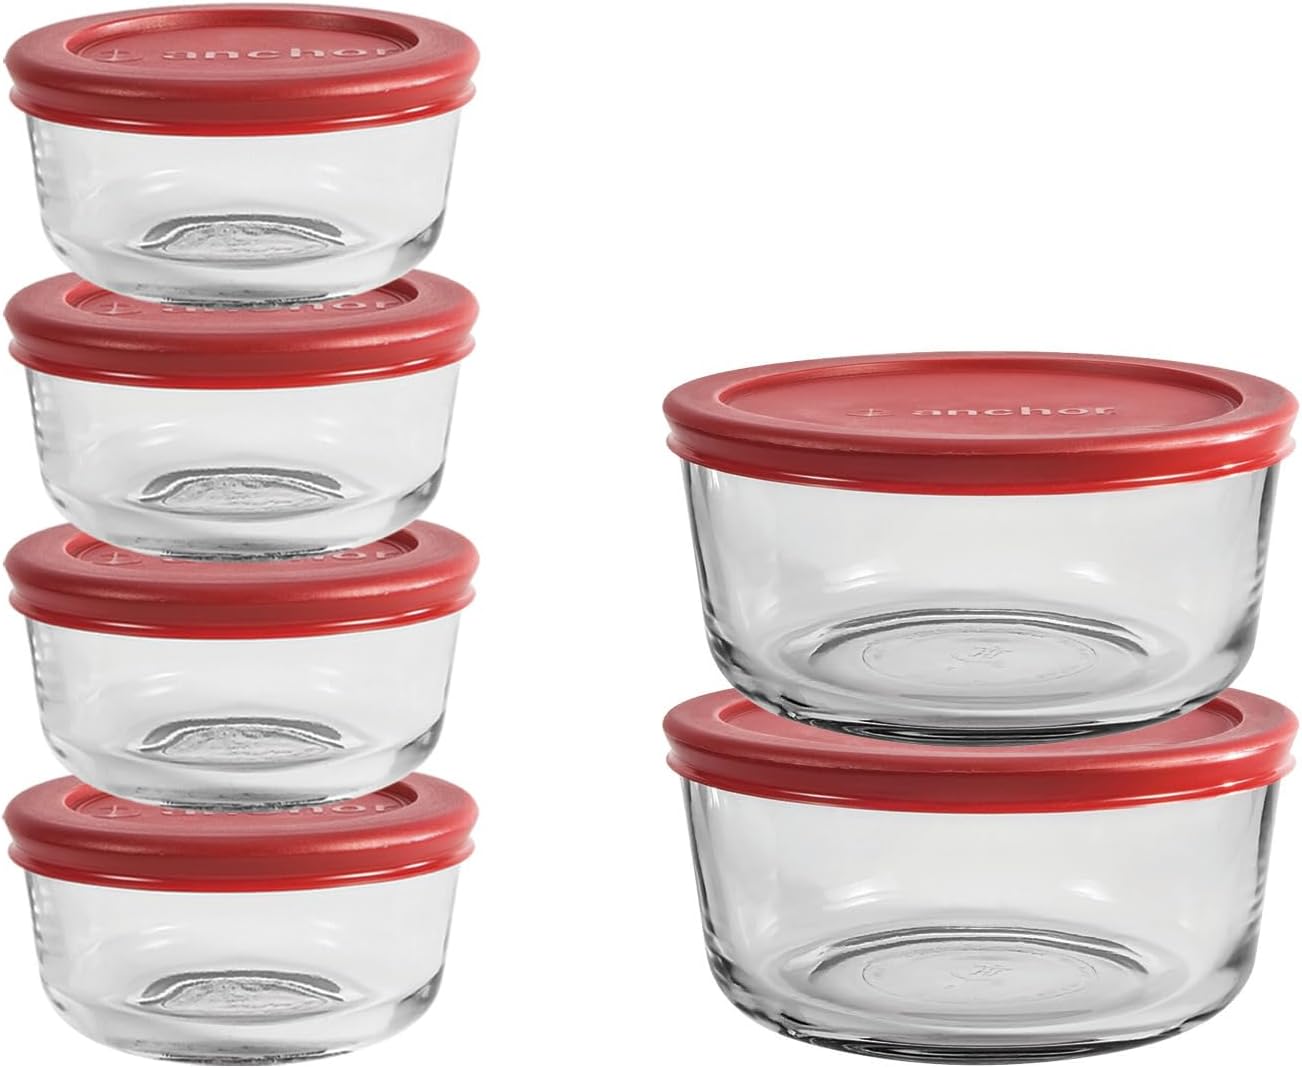 Anchor Hocking SnugFit 12 Piece Glass Food Storage Containers with Lids,  Mixed Blue